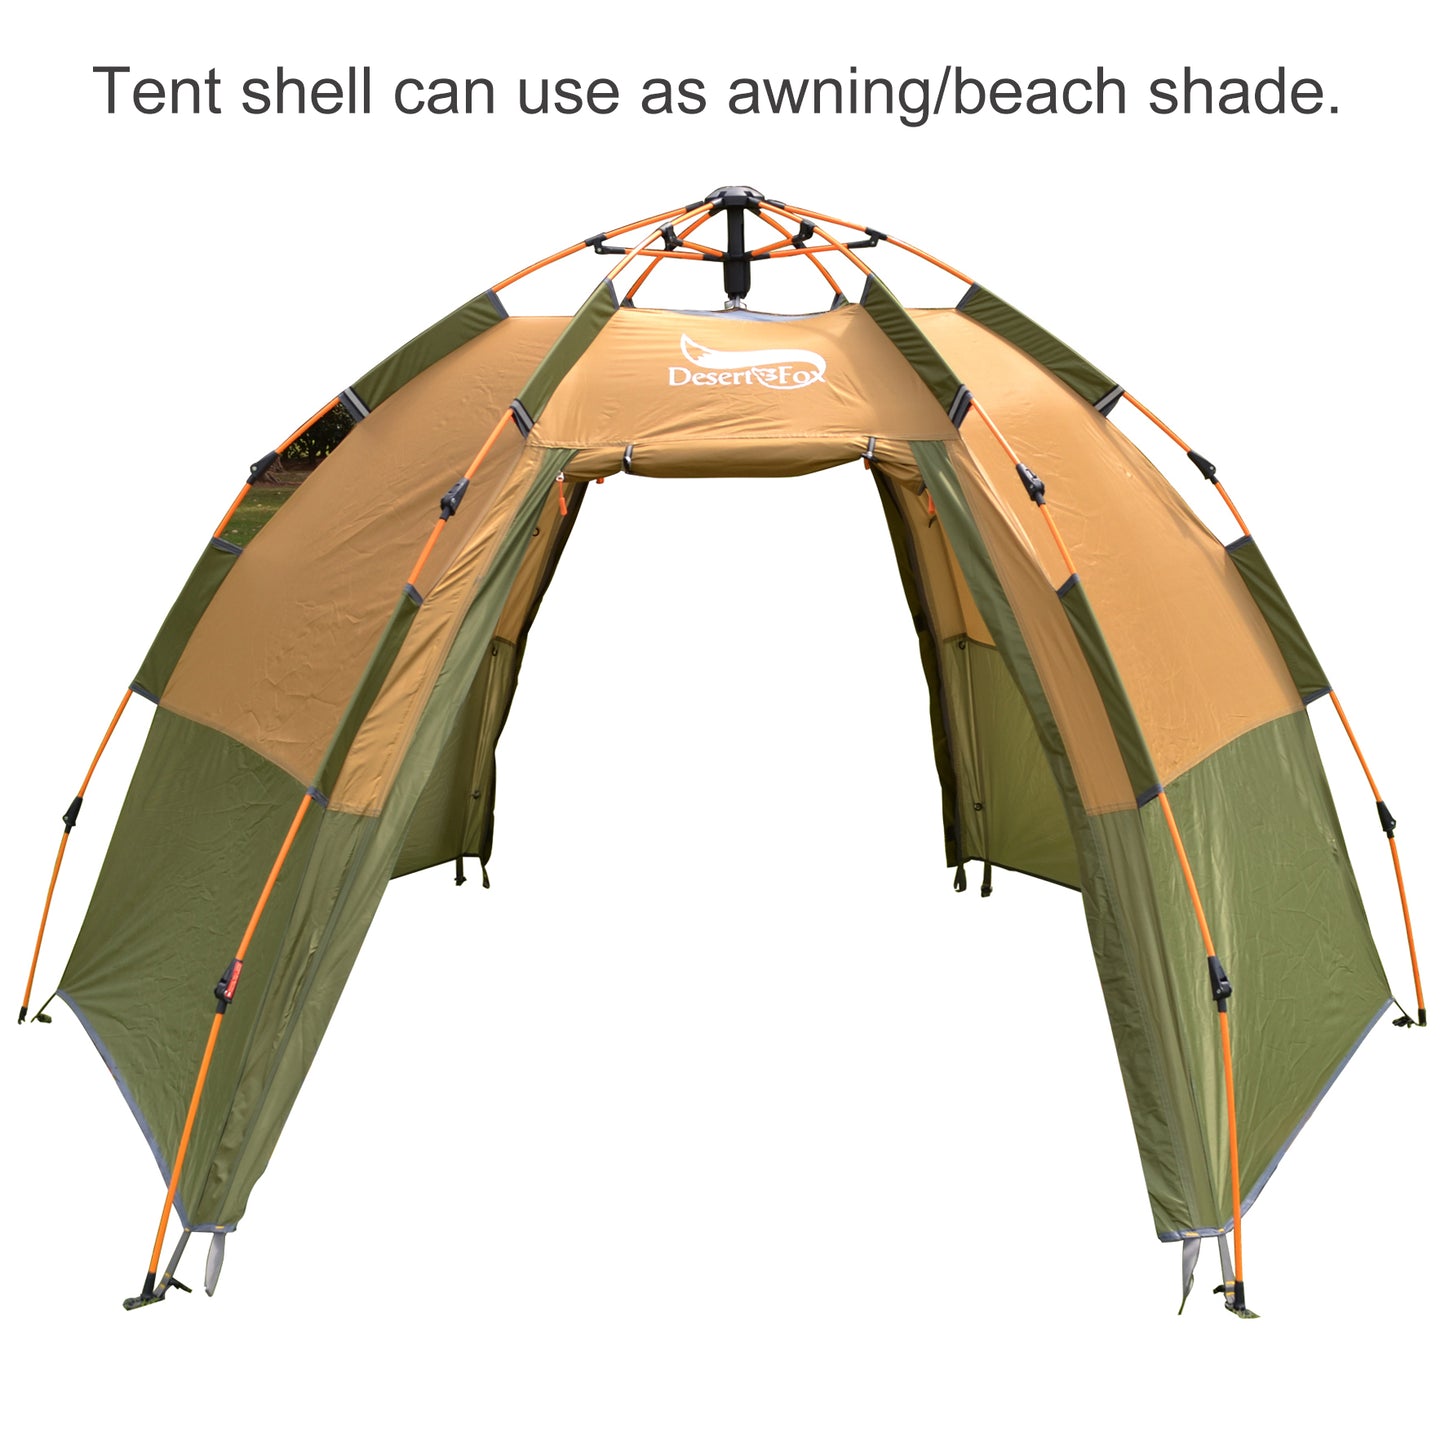 Fully Automatic Hexagonal Speed-opening Rainstorm-proof Camping Tent